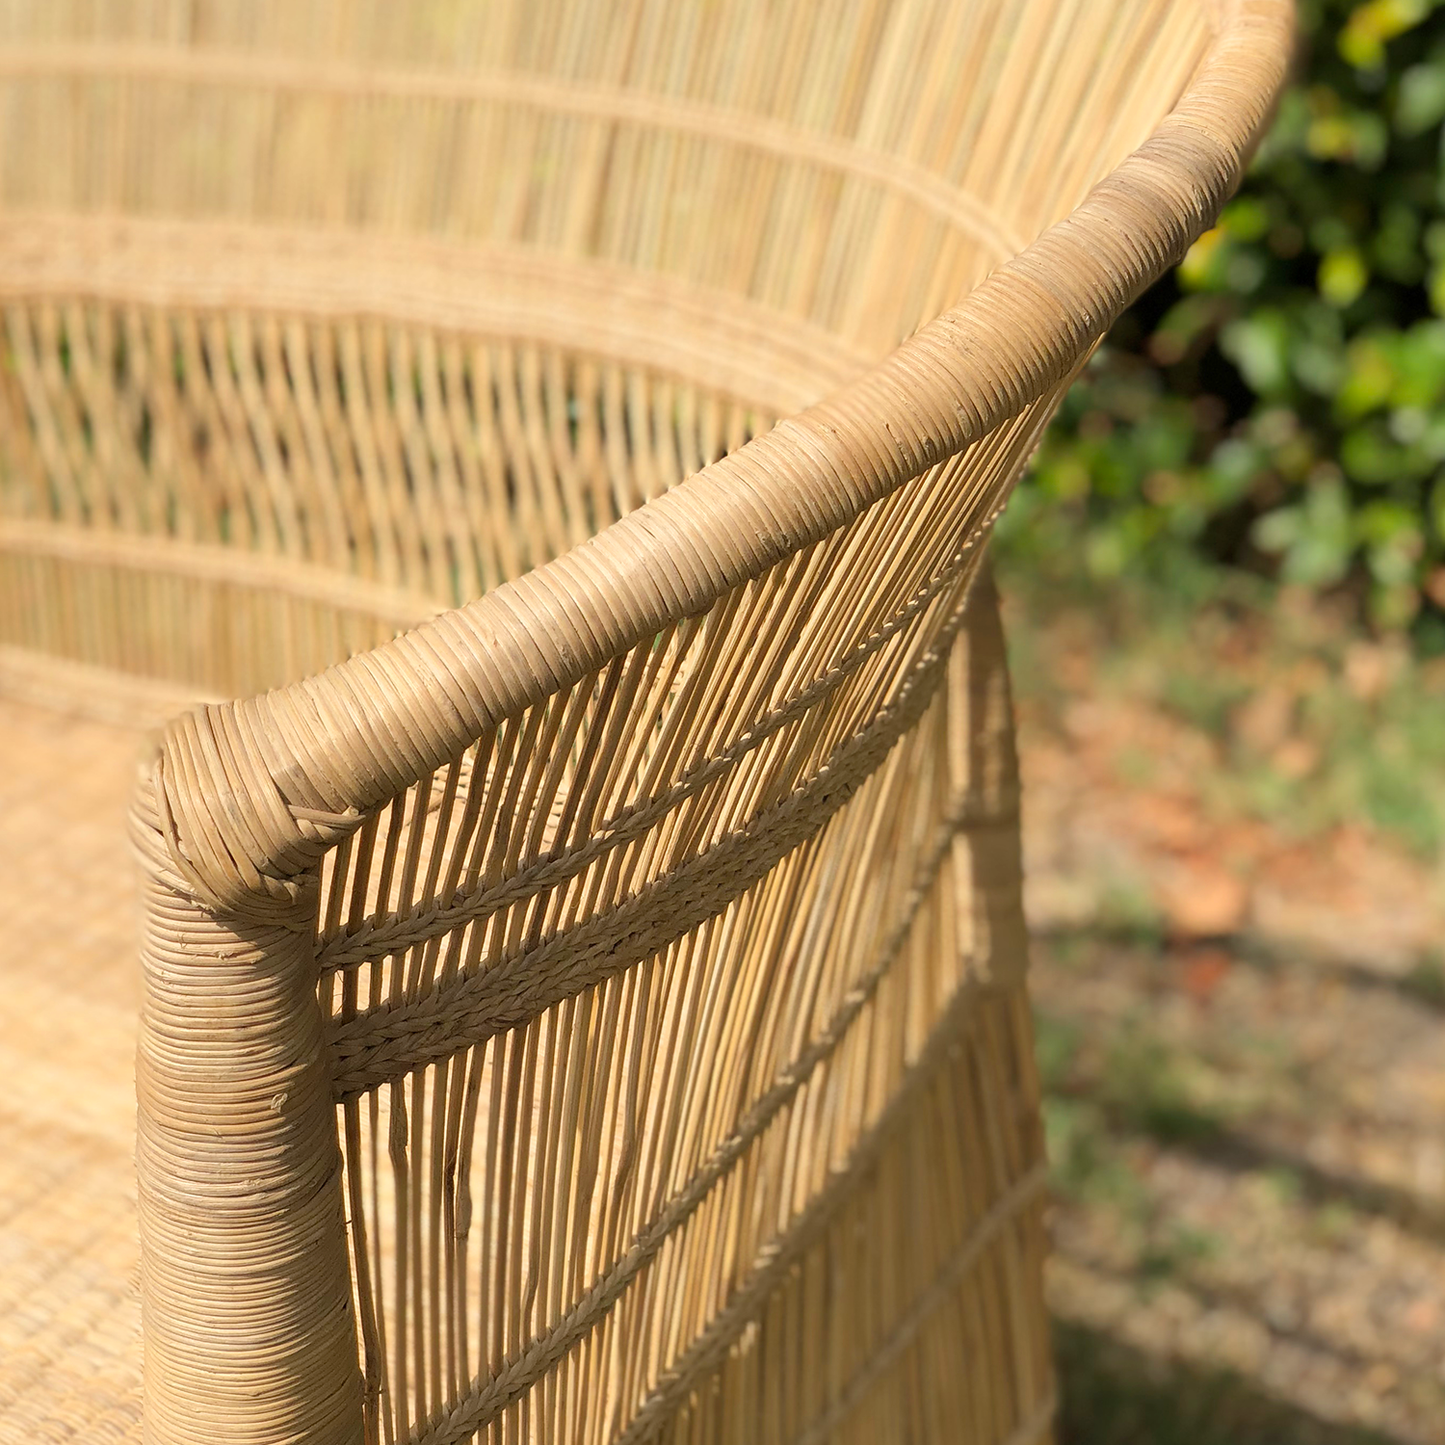 Two Double set combo Traditional Malawi Cane Chair Furniture Chairs Rattan Weaved Wicker